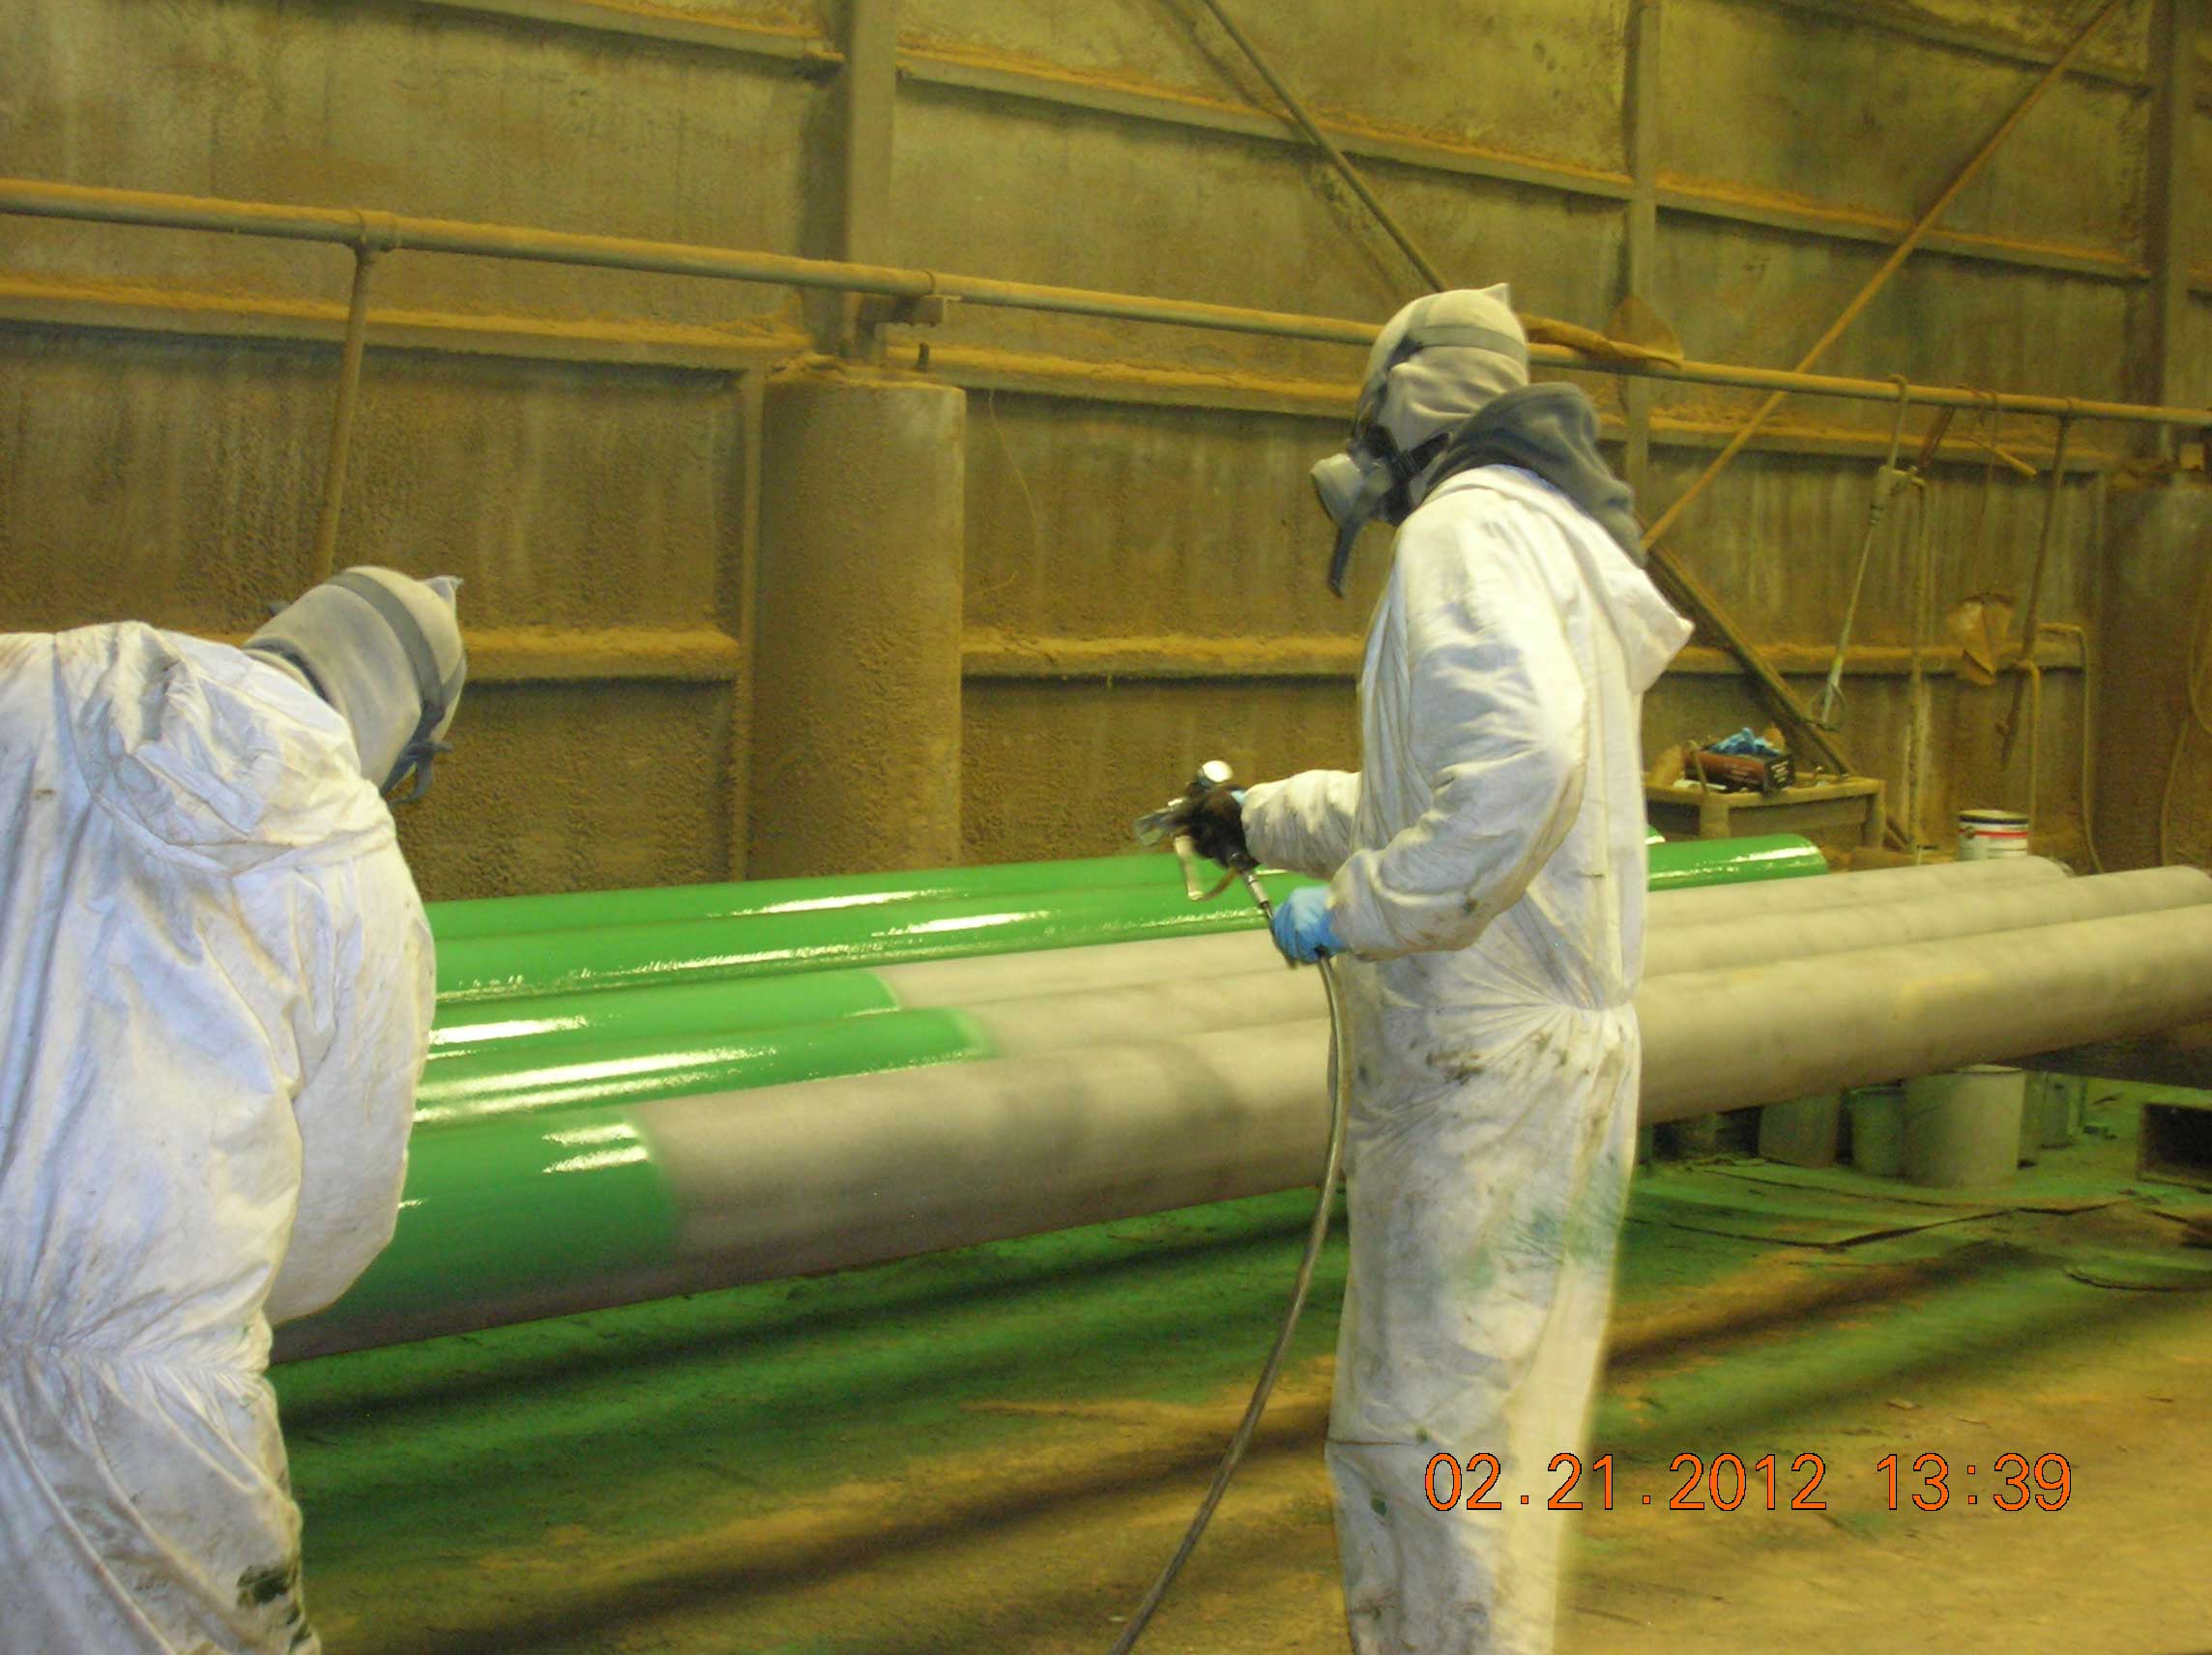 Superior painting and coating services…We’ve got you covered